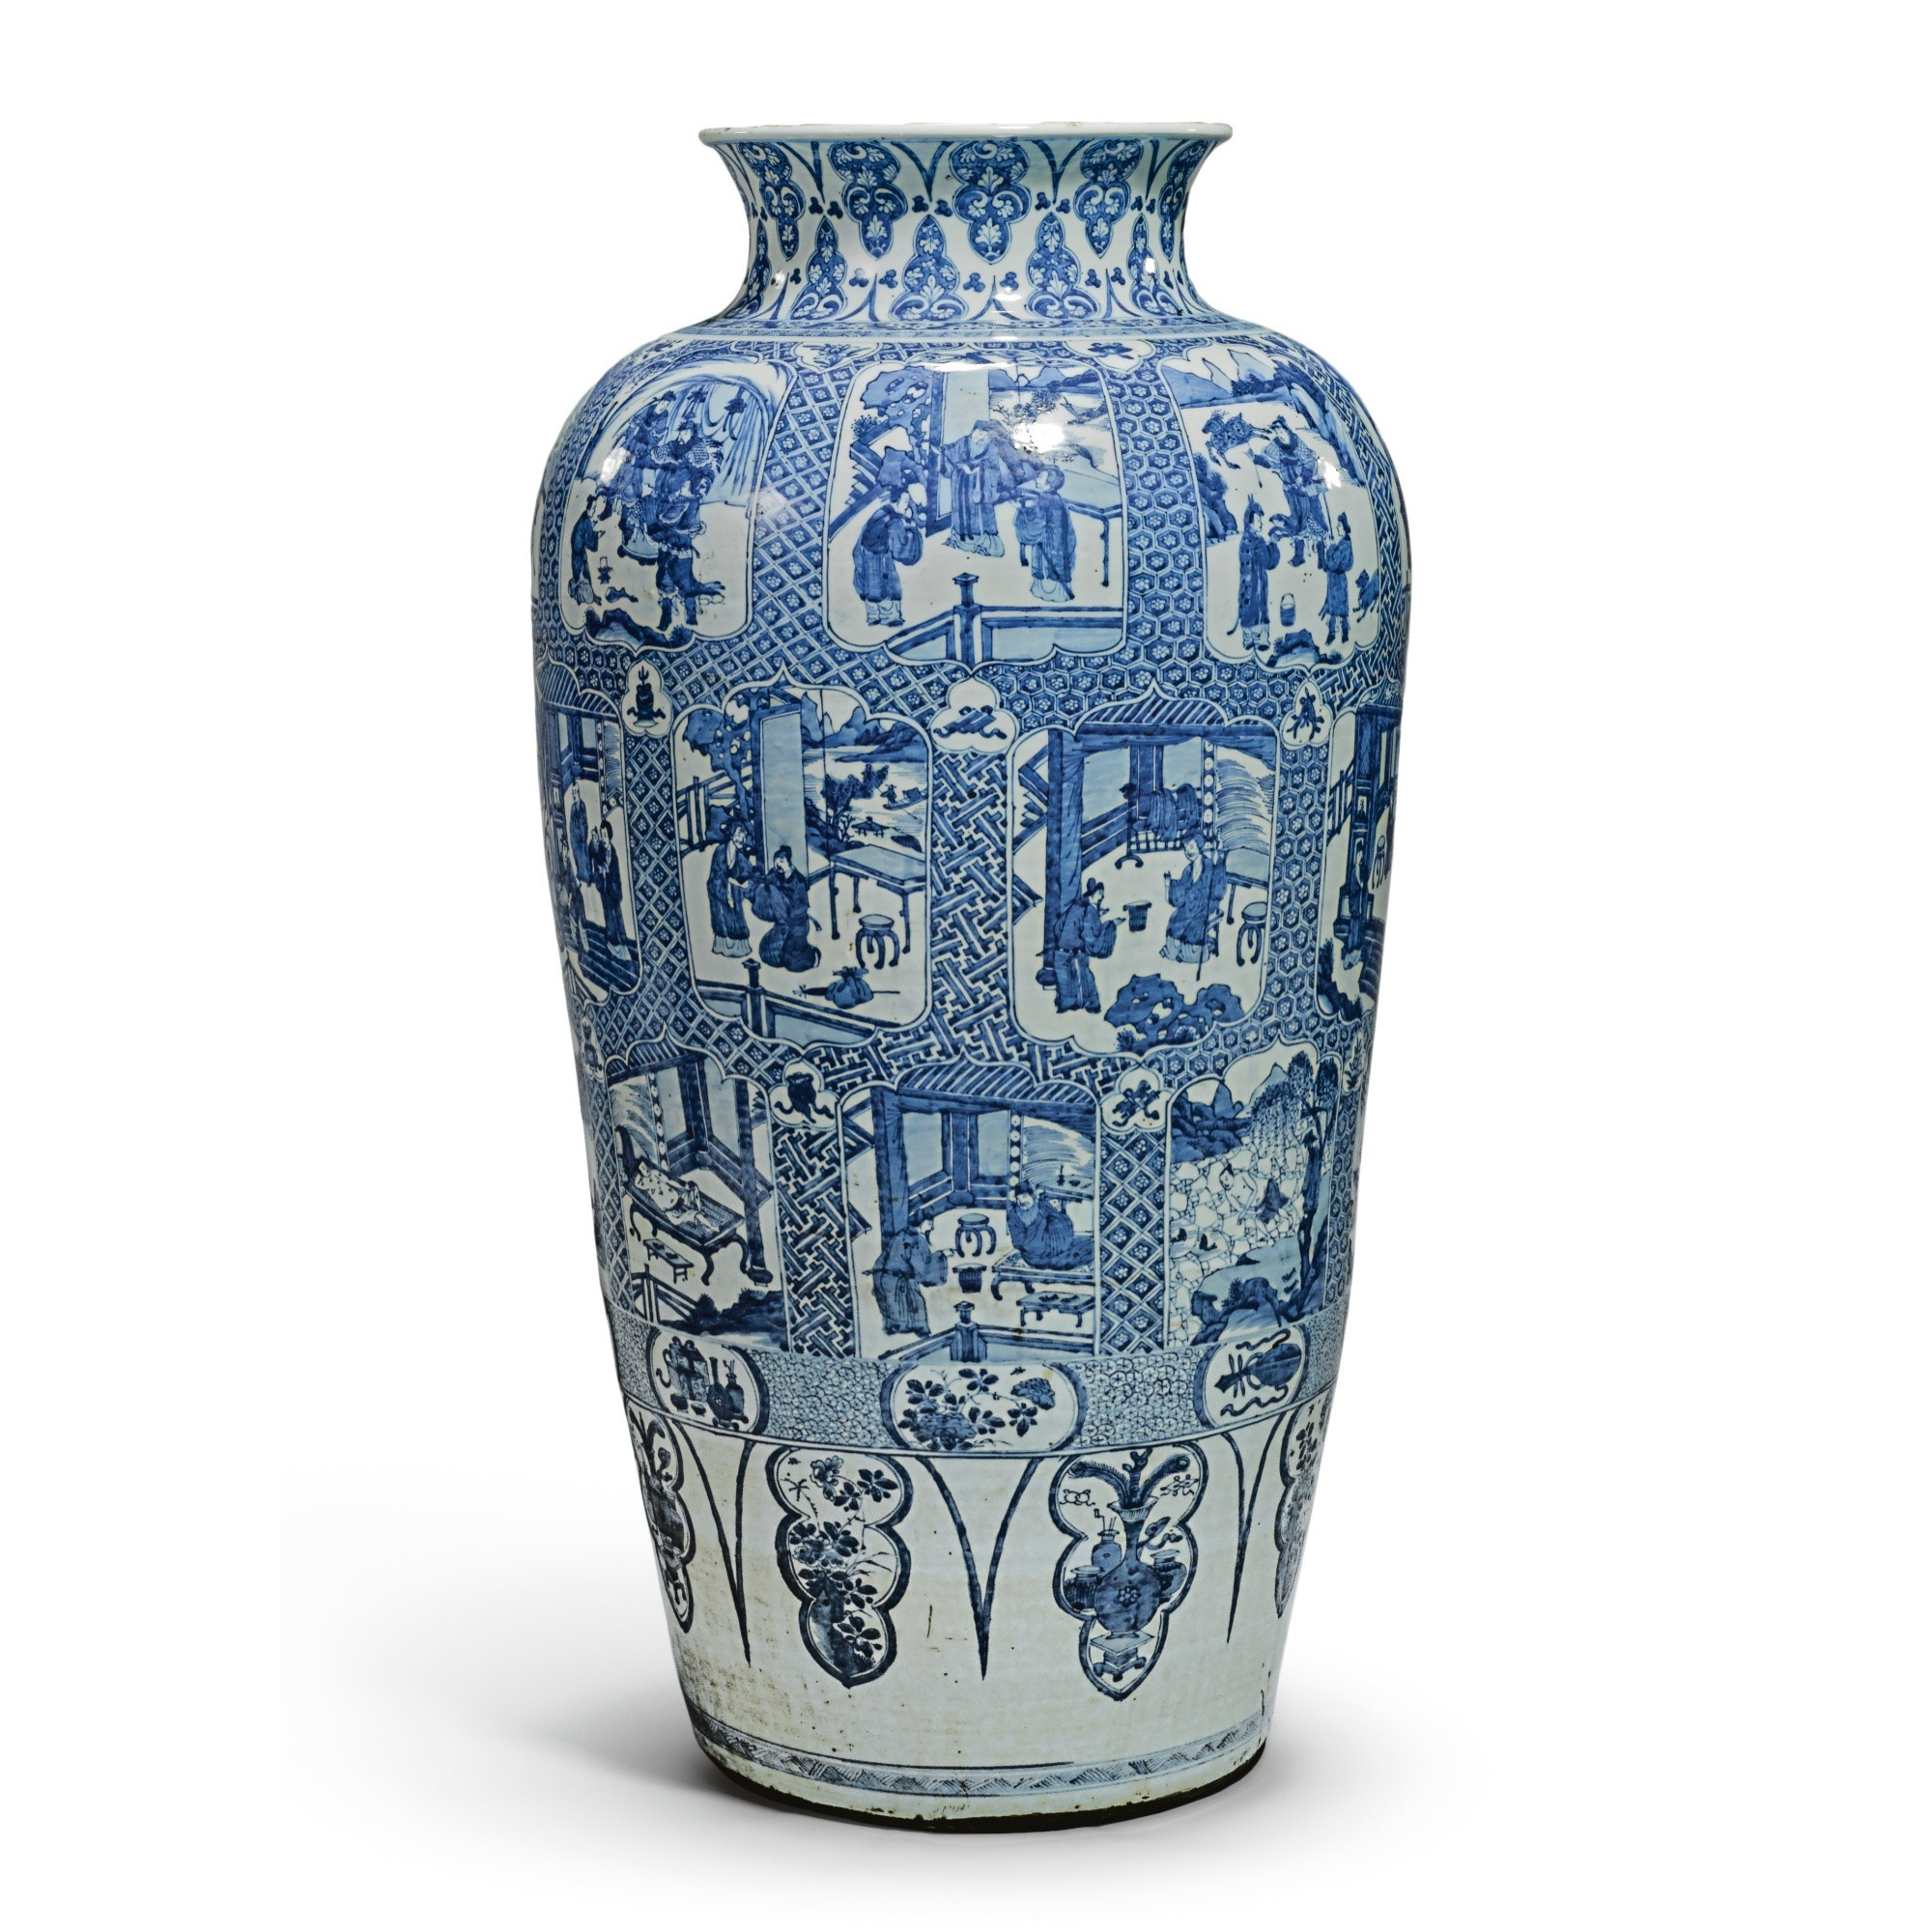 25 Recommended Large White Vases Online 2024 free download large white vases online of a large chinese kangxi blue and white soldier vase painted with for a large chinese kangxi blue and white soldier vase painted with the twenty